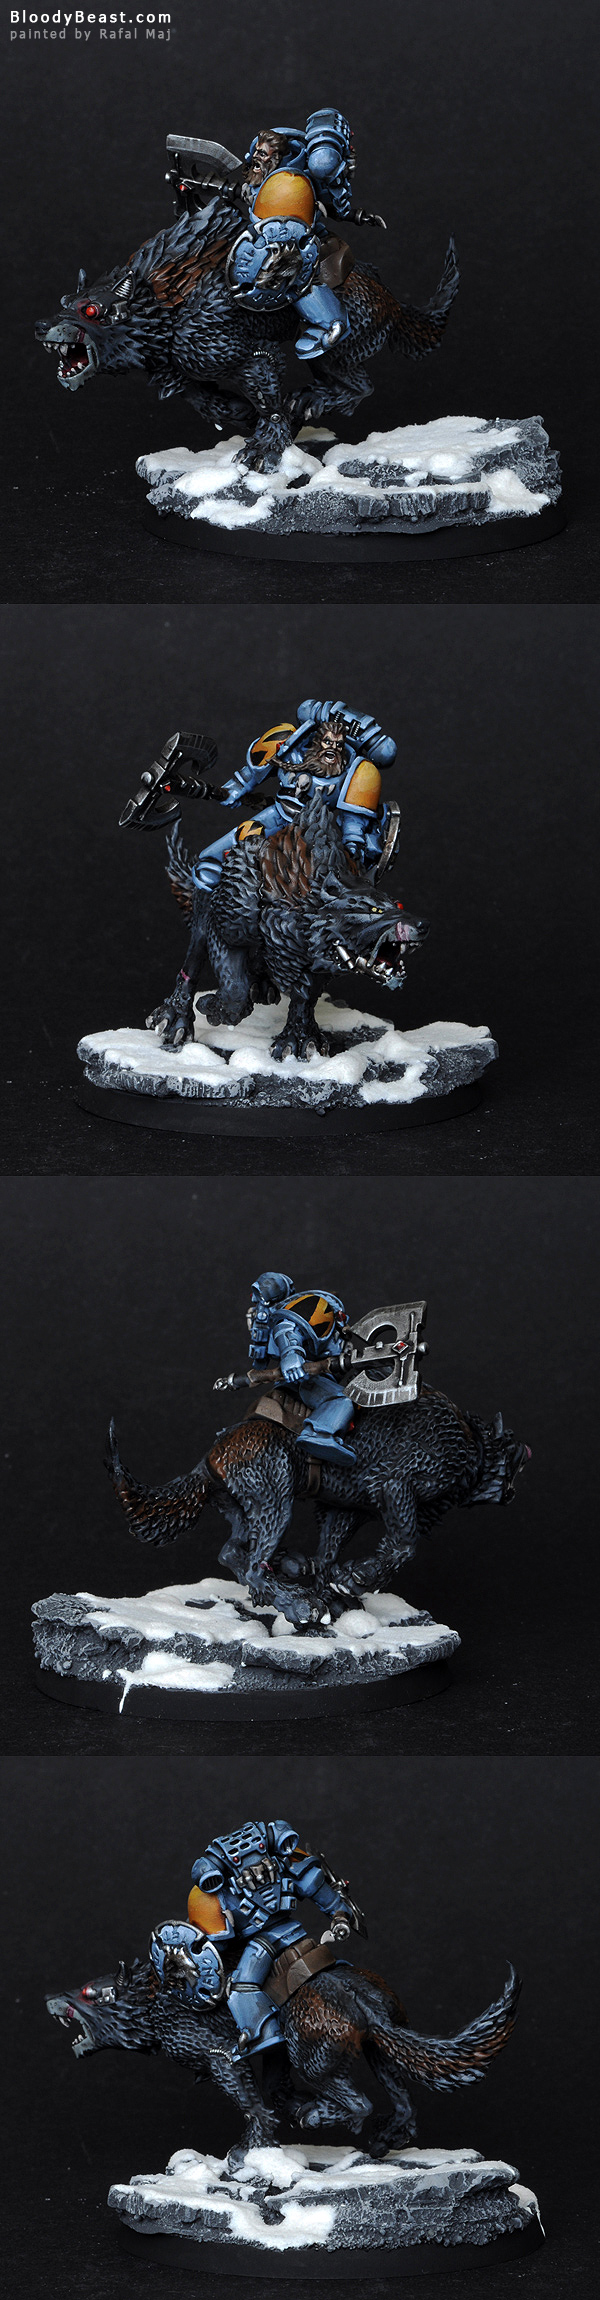 Space Wolves Thunderwolf painted by Rafal Maj (BloodyBeast.com)